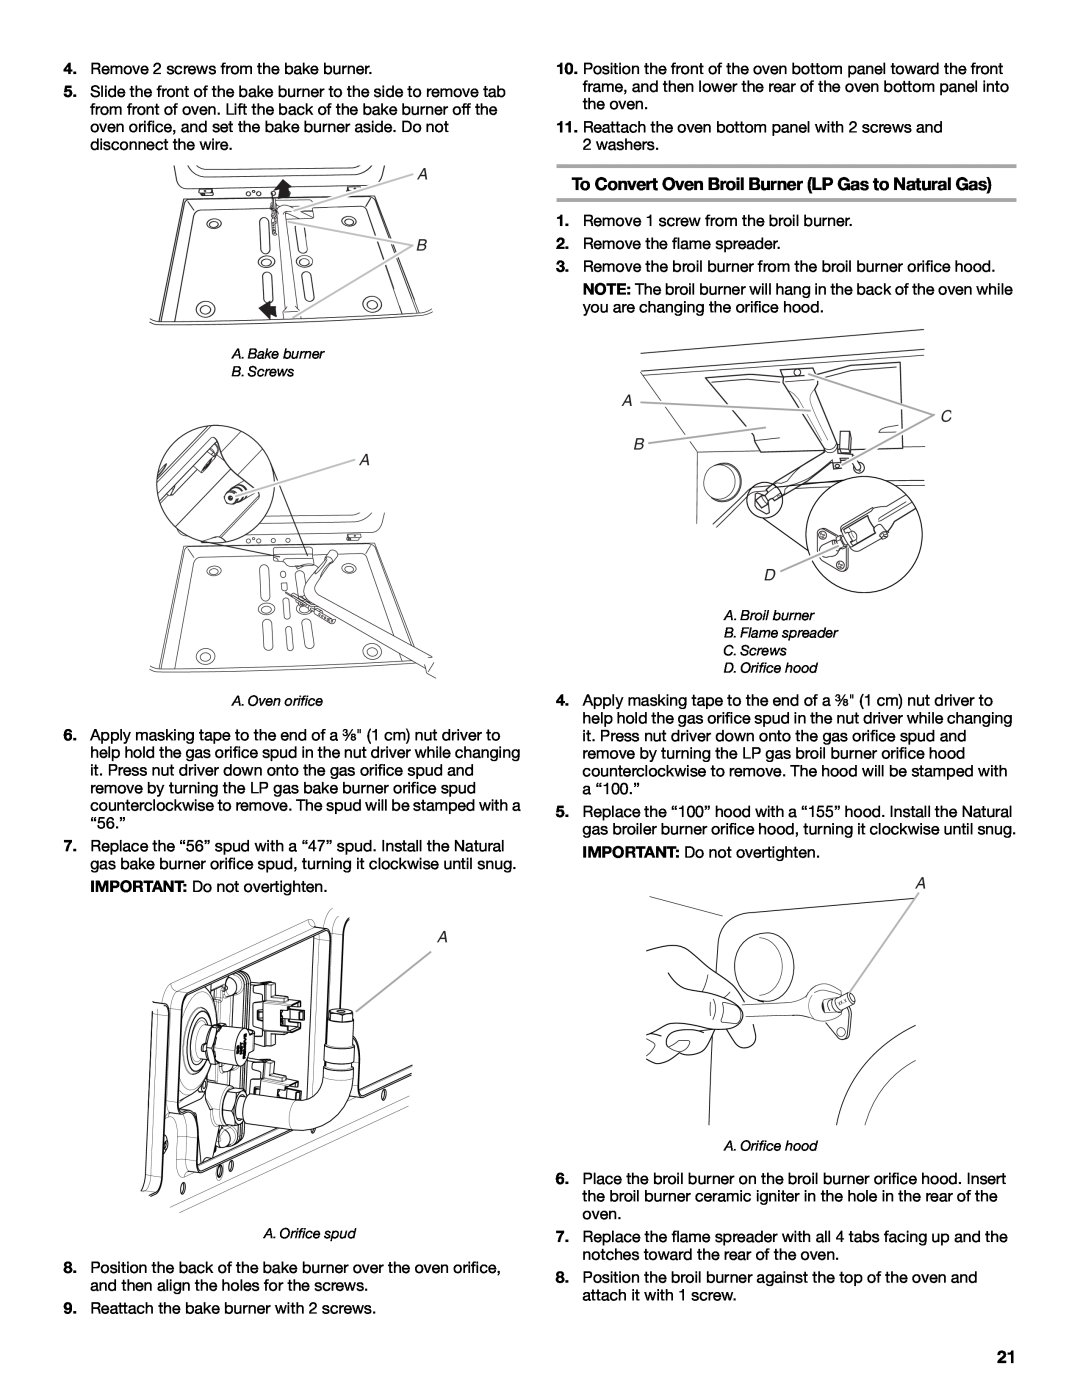 Whirlpool W10665256D installation instructions To Convert Oven Broil Burner LP Gas to Natural Gas, A C B D 